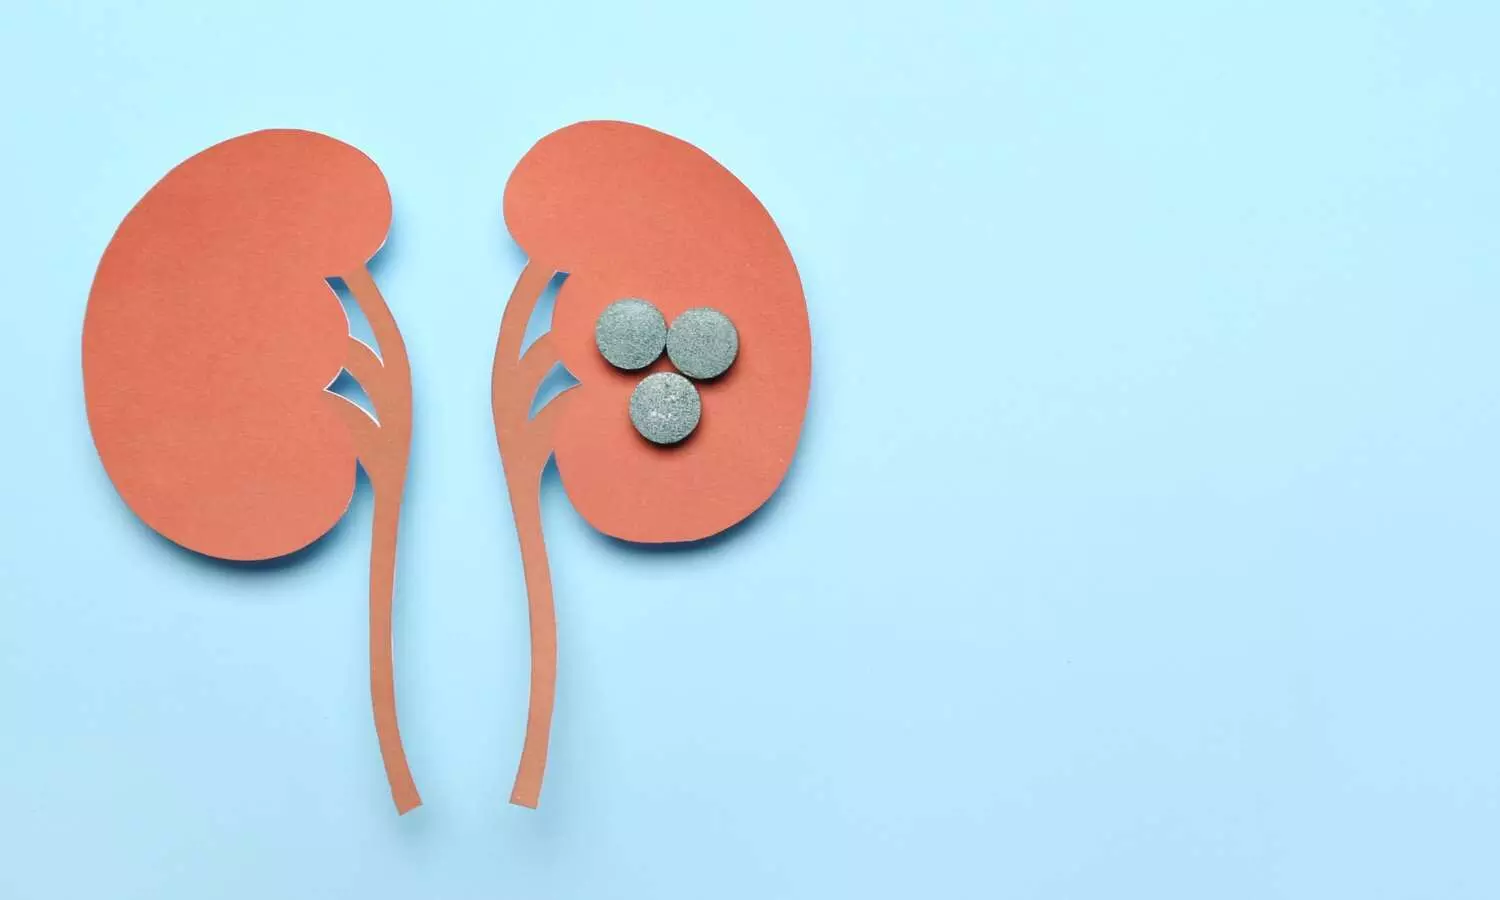 FDA approves oral daprodustat for treating anaemia in CKD patients on dialysis